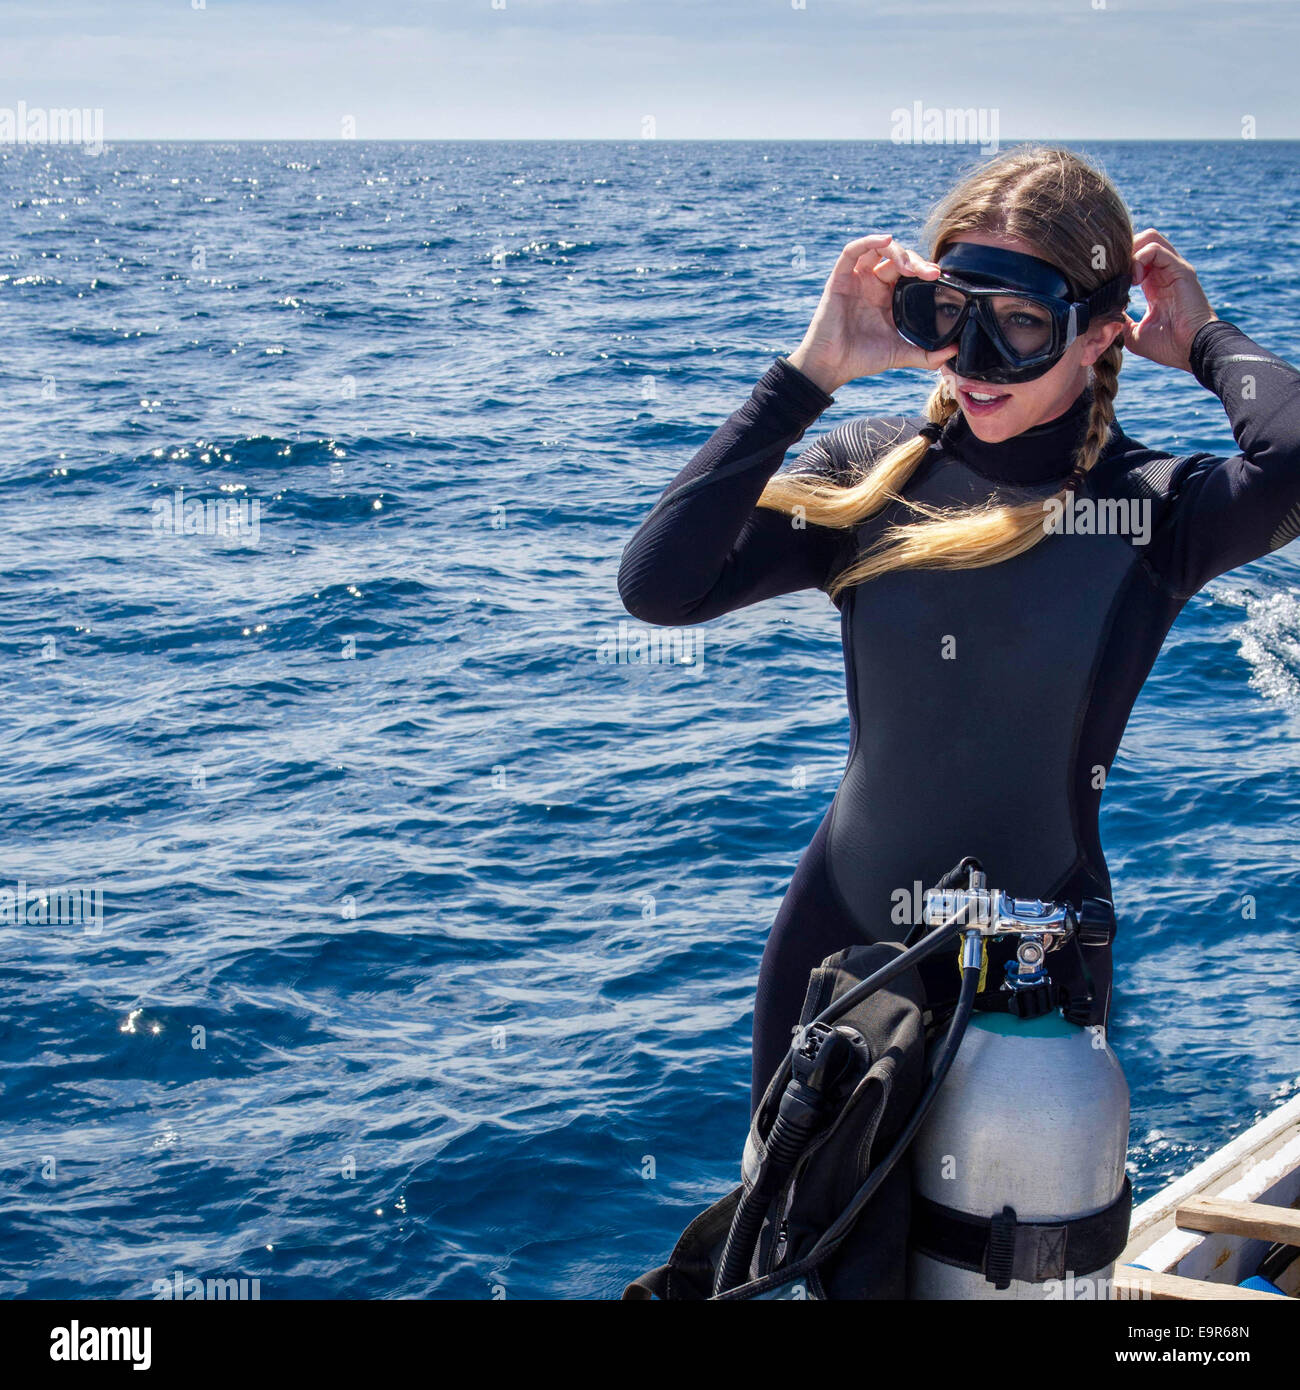 Caucasian woman in wetsuit on a boat putting on goggles in preparation for scuba diving. Stock Photo